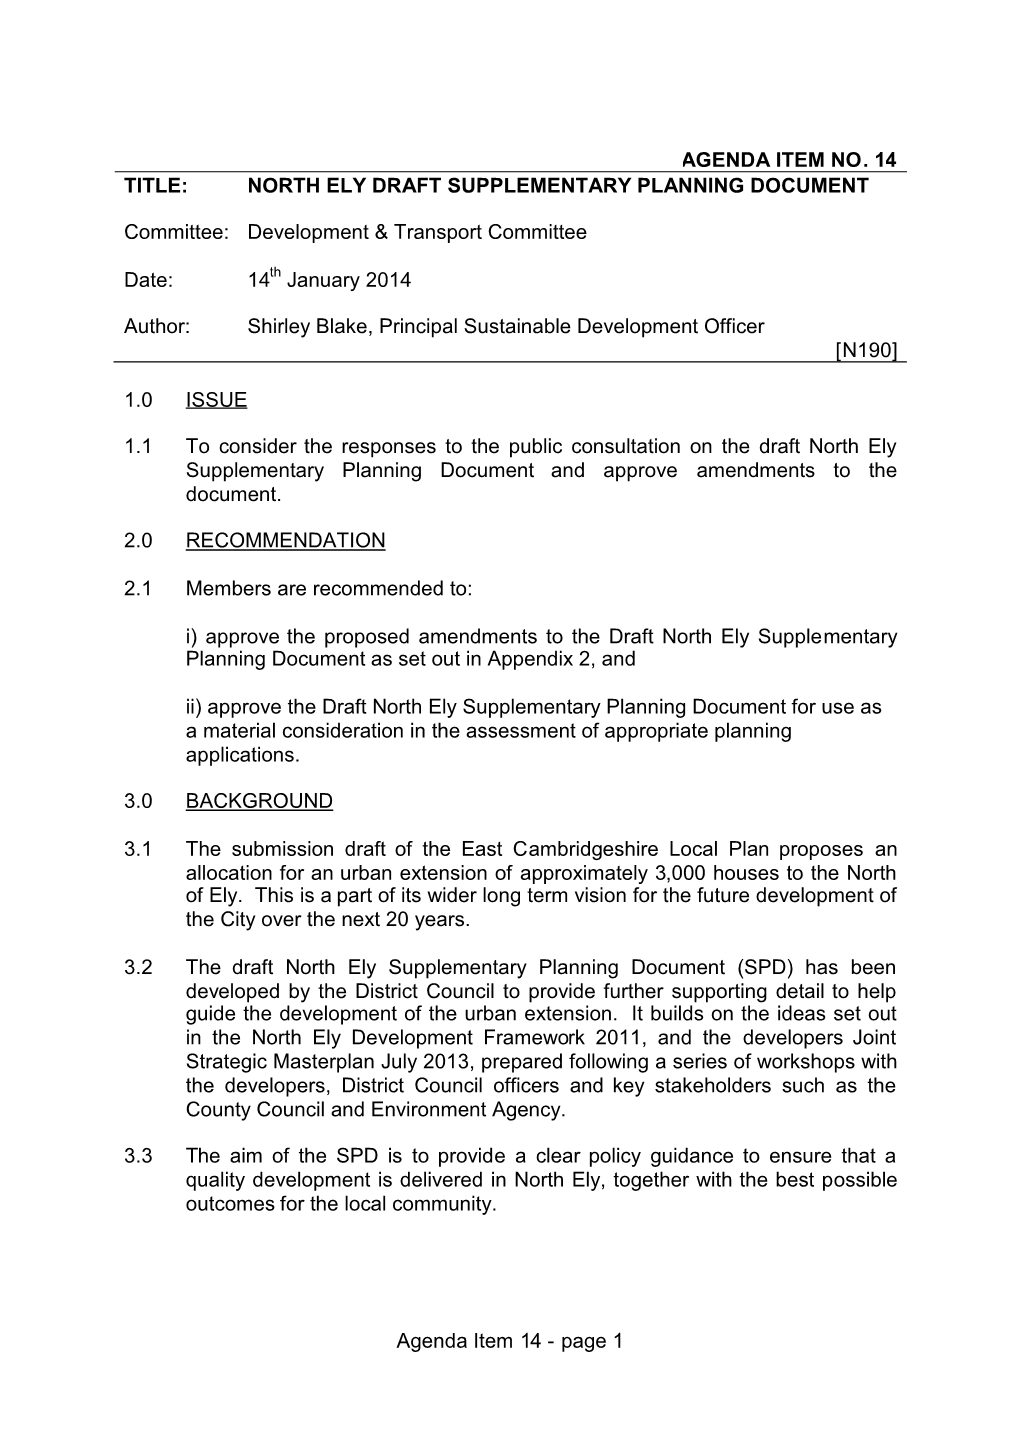 Agenda Item No. 14 Title: North Ely Draft Supplementary Planning Document